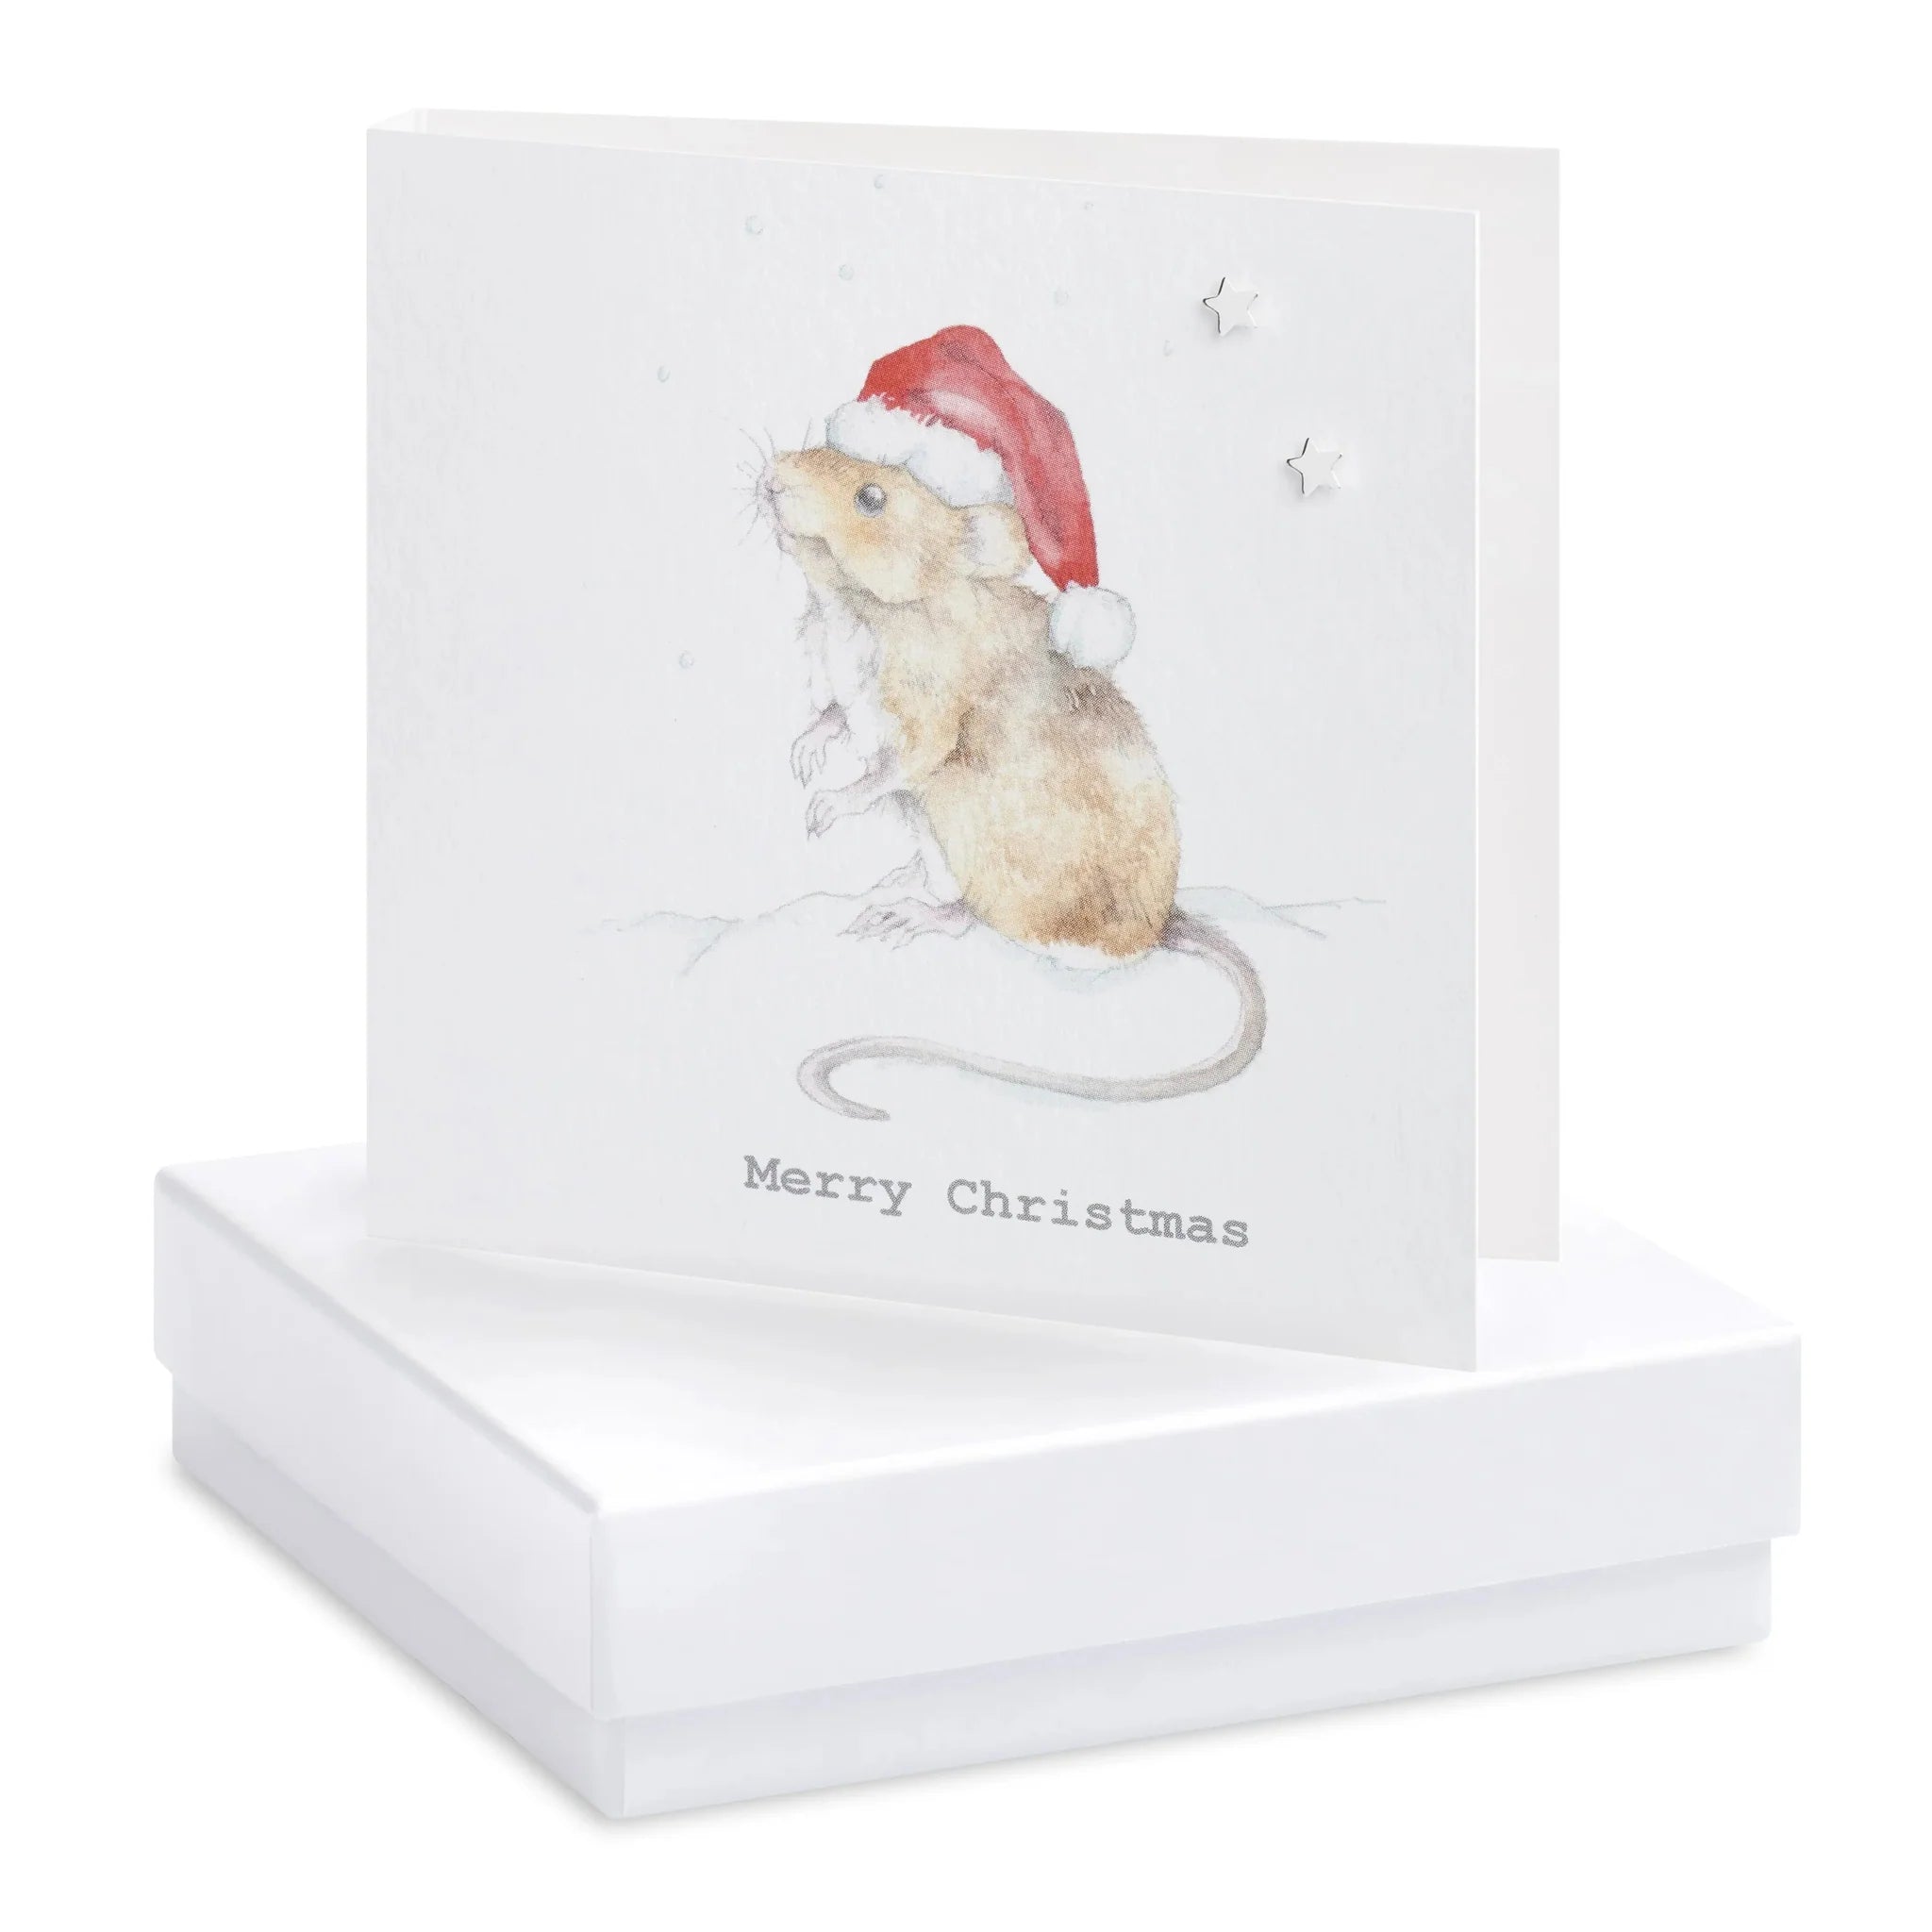 Crumble & Core | Christmas Mouse Card with Earrings in a White Box by Weirs of Baggot Street